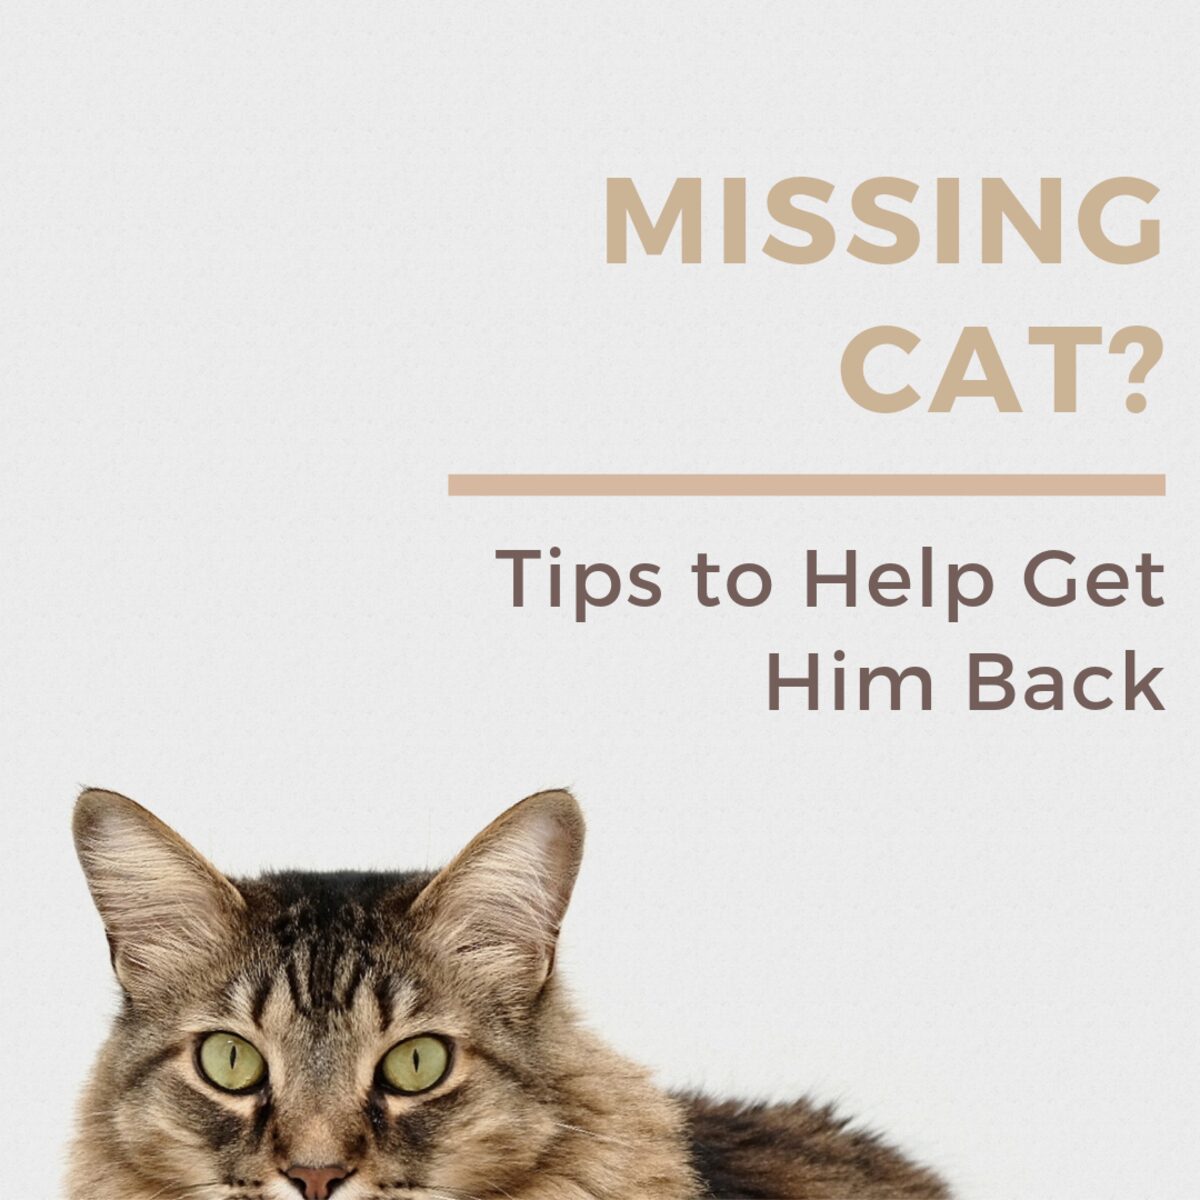 Lost Heart: Steps to Take if Your Cat Goes Missing